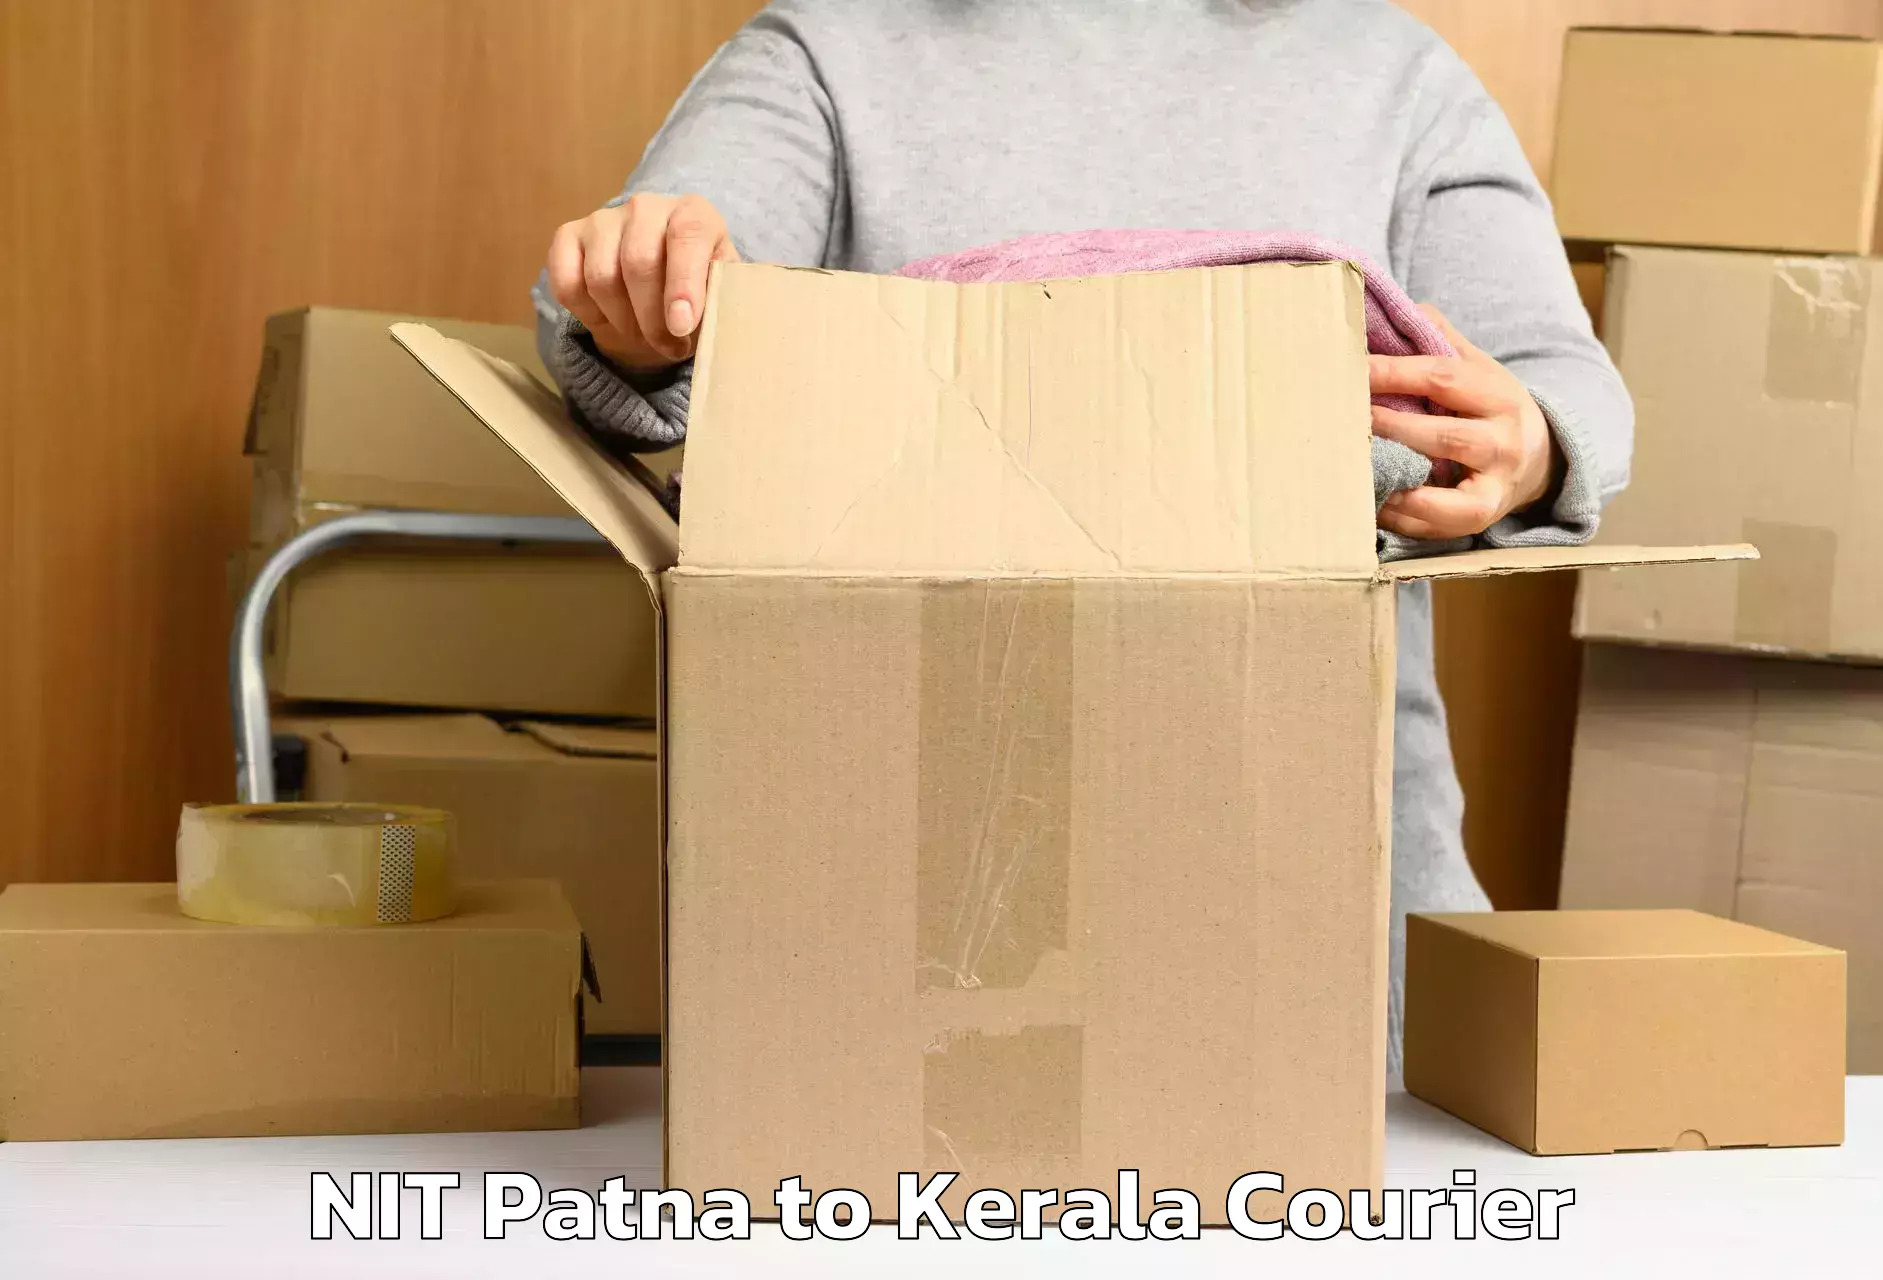 Luggage delivery app NIT Patna to Kerala